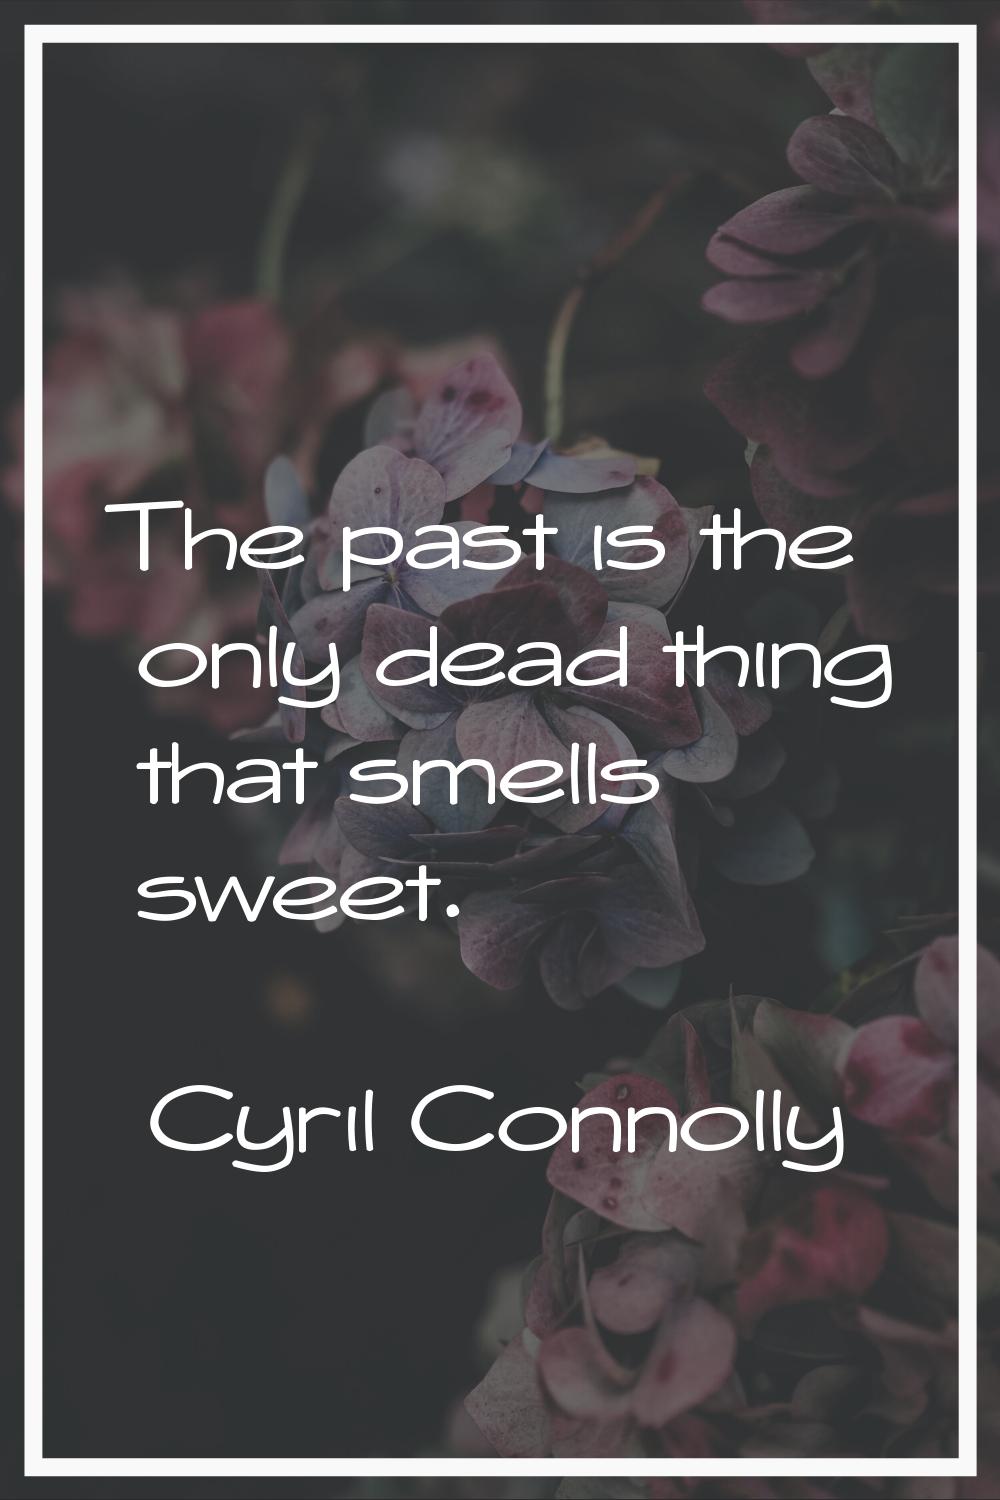 The past is the only dead thing that smells sweet.